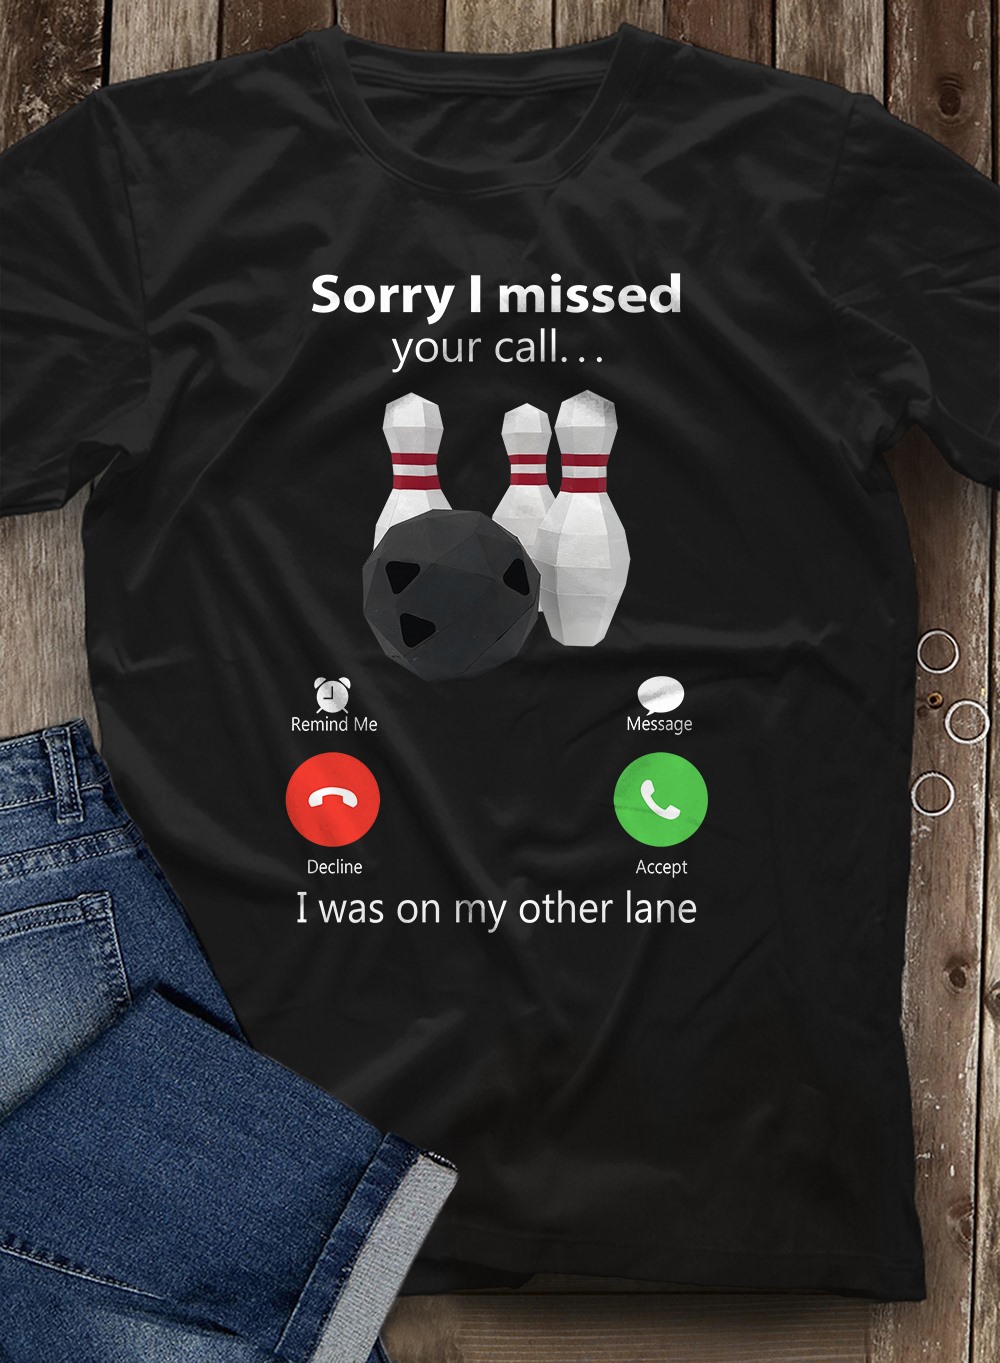 Calling Bowling - Sorry I Missed your call, Remind Me, Message, Decline, Accept, I Was On My Other Lane